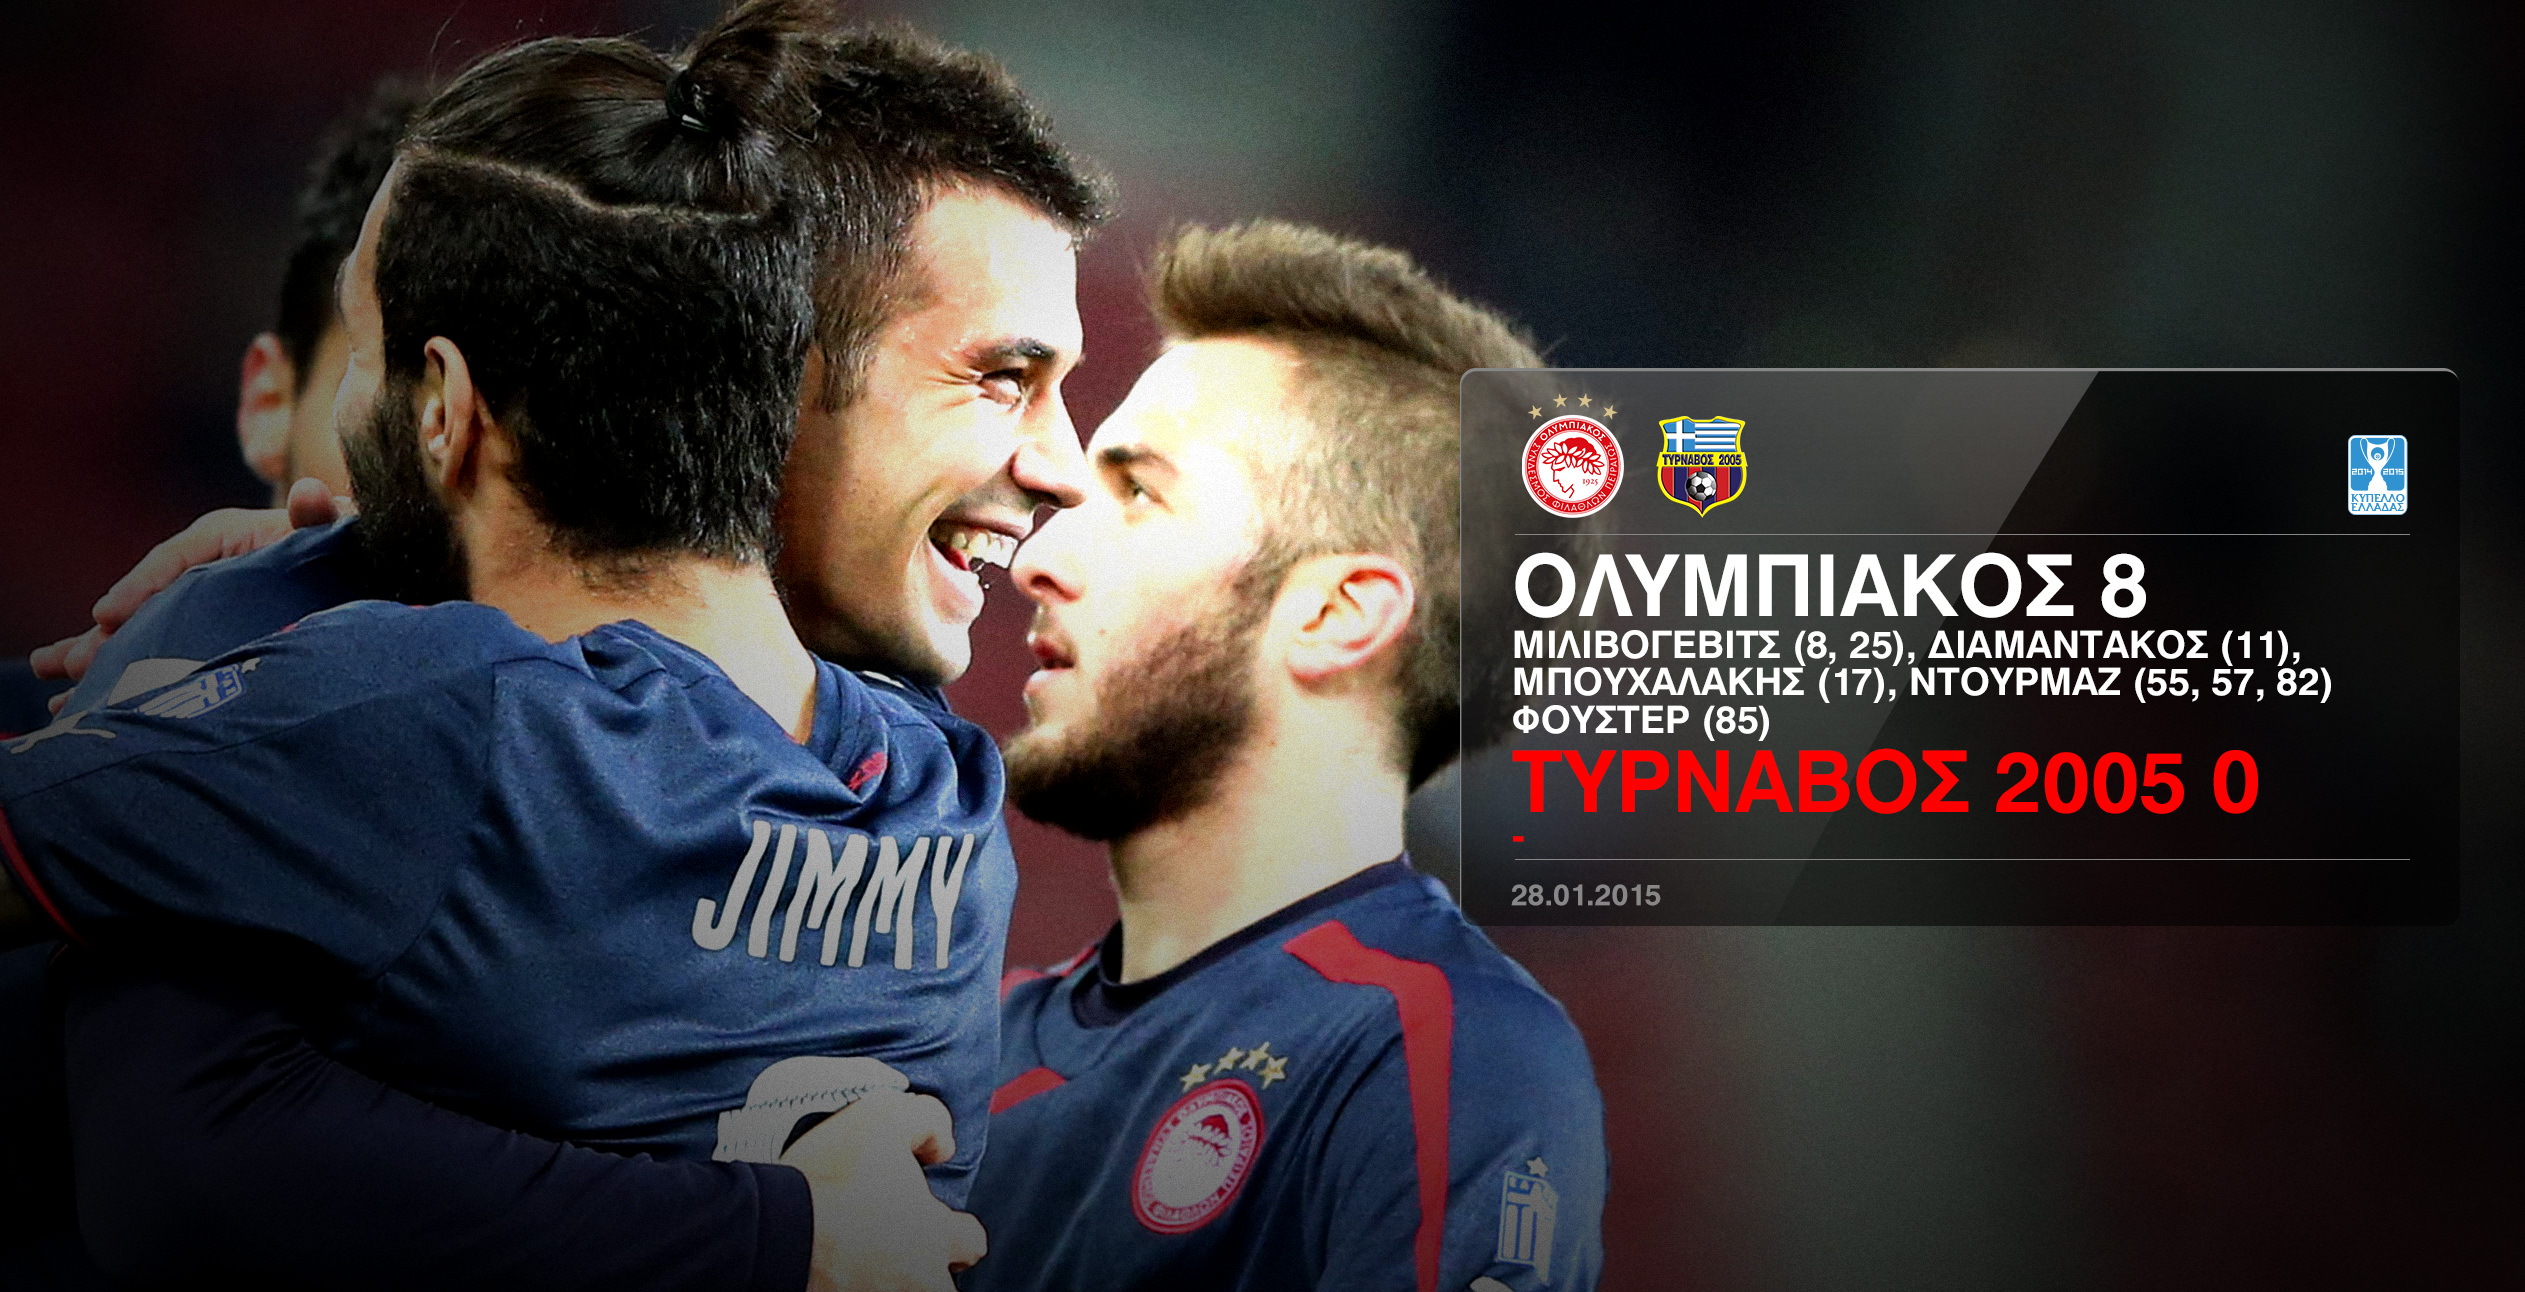 Olympiacos – Tyrnavos 8-0